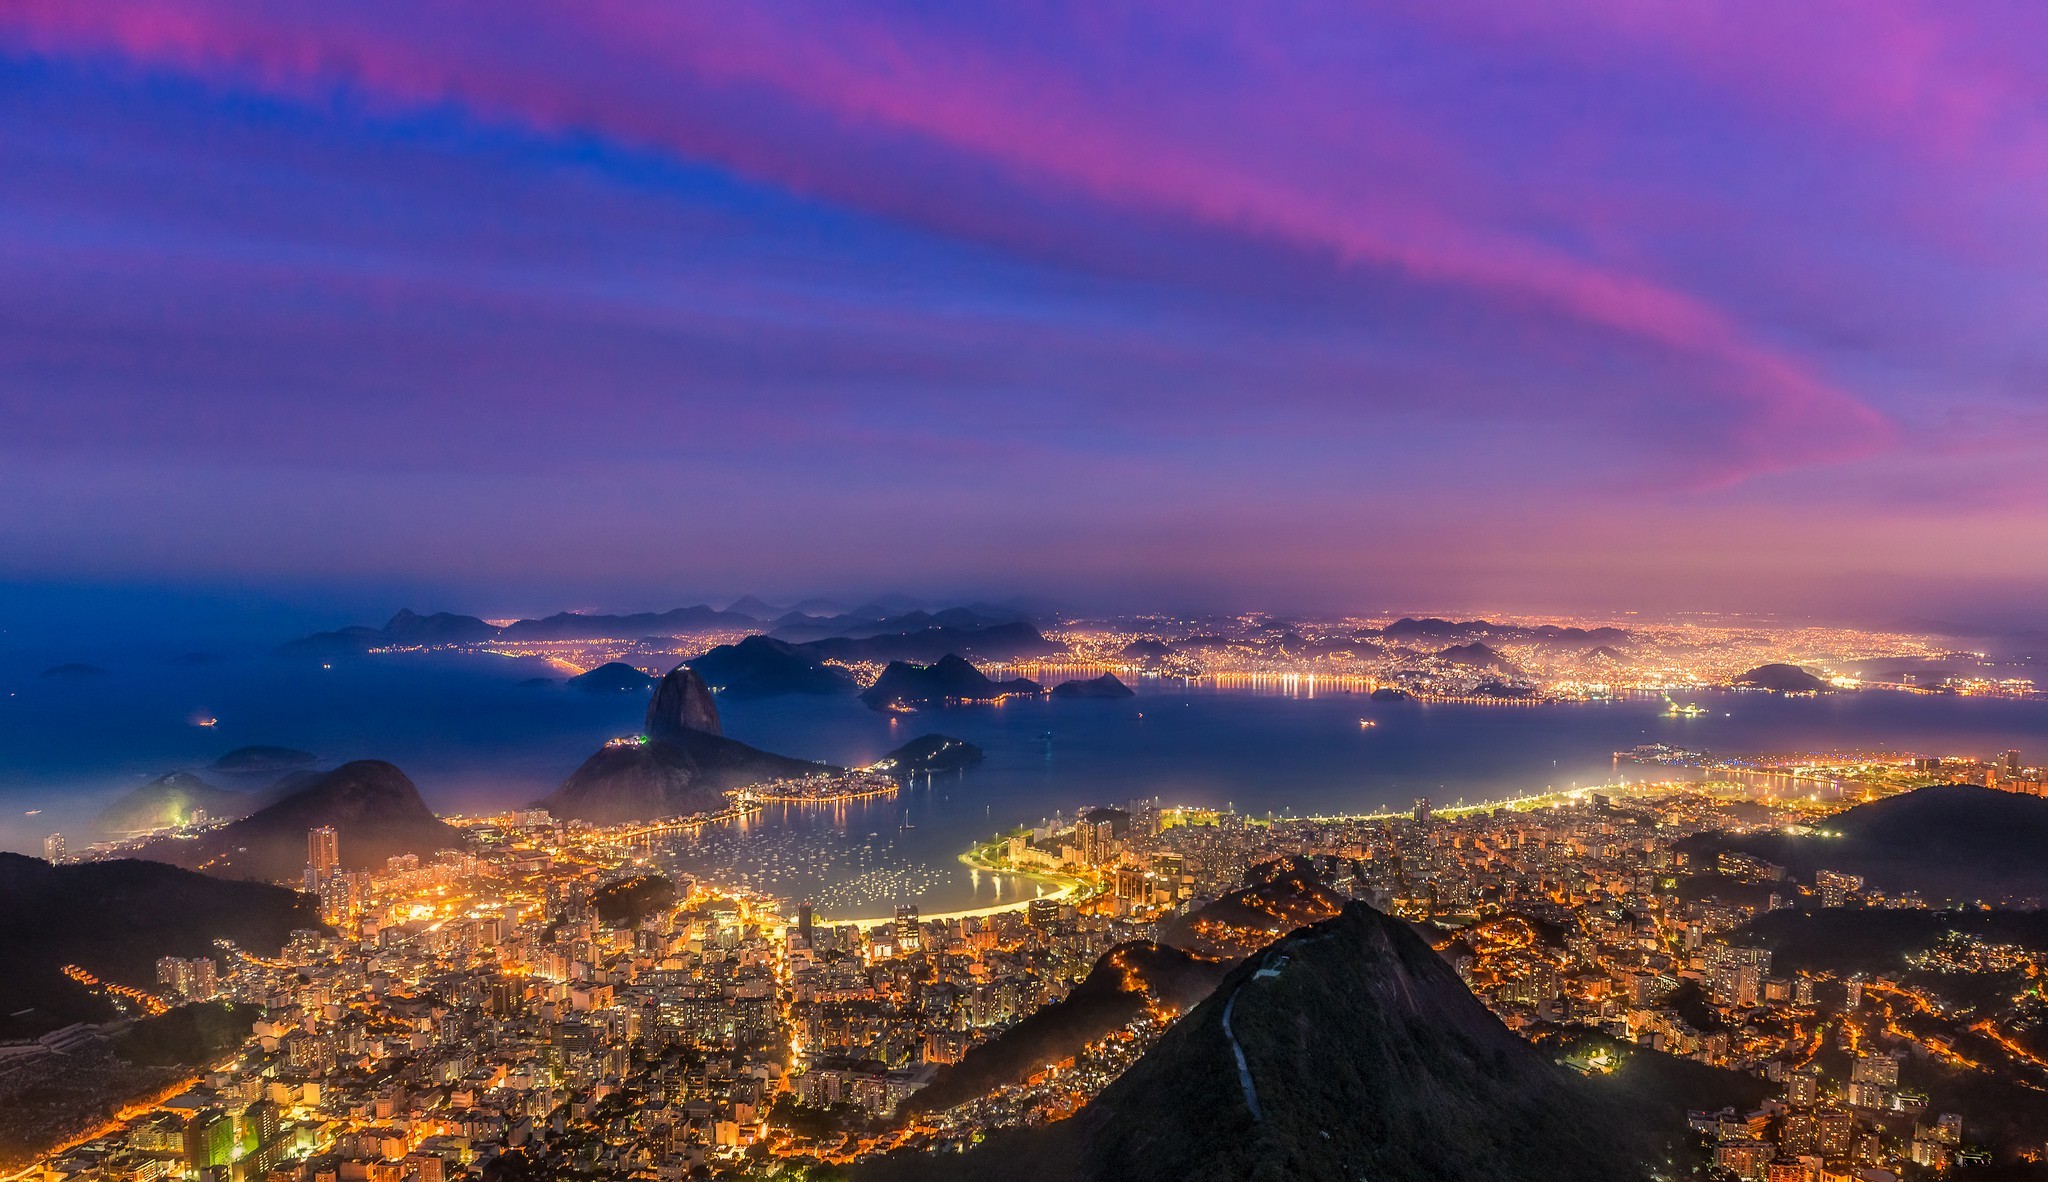 Cityscape architecture building city rio de janeiro brazil evening sunset clouds lights sea bay hill mountain birds eye view wallpapers hd desktop and mobile backgrounds